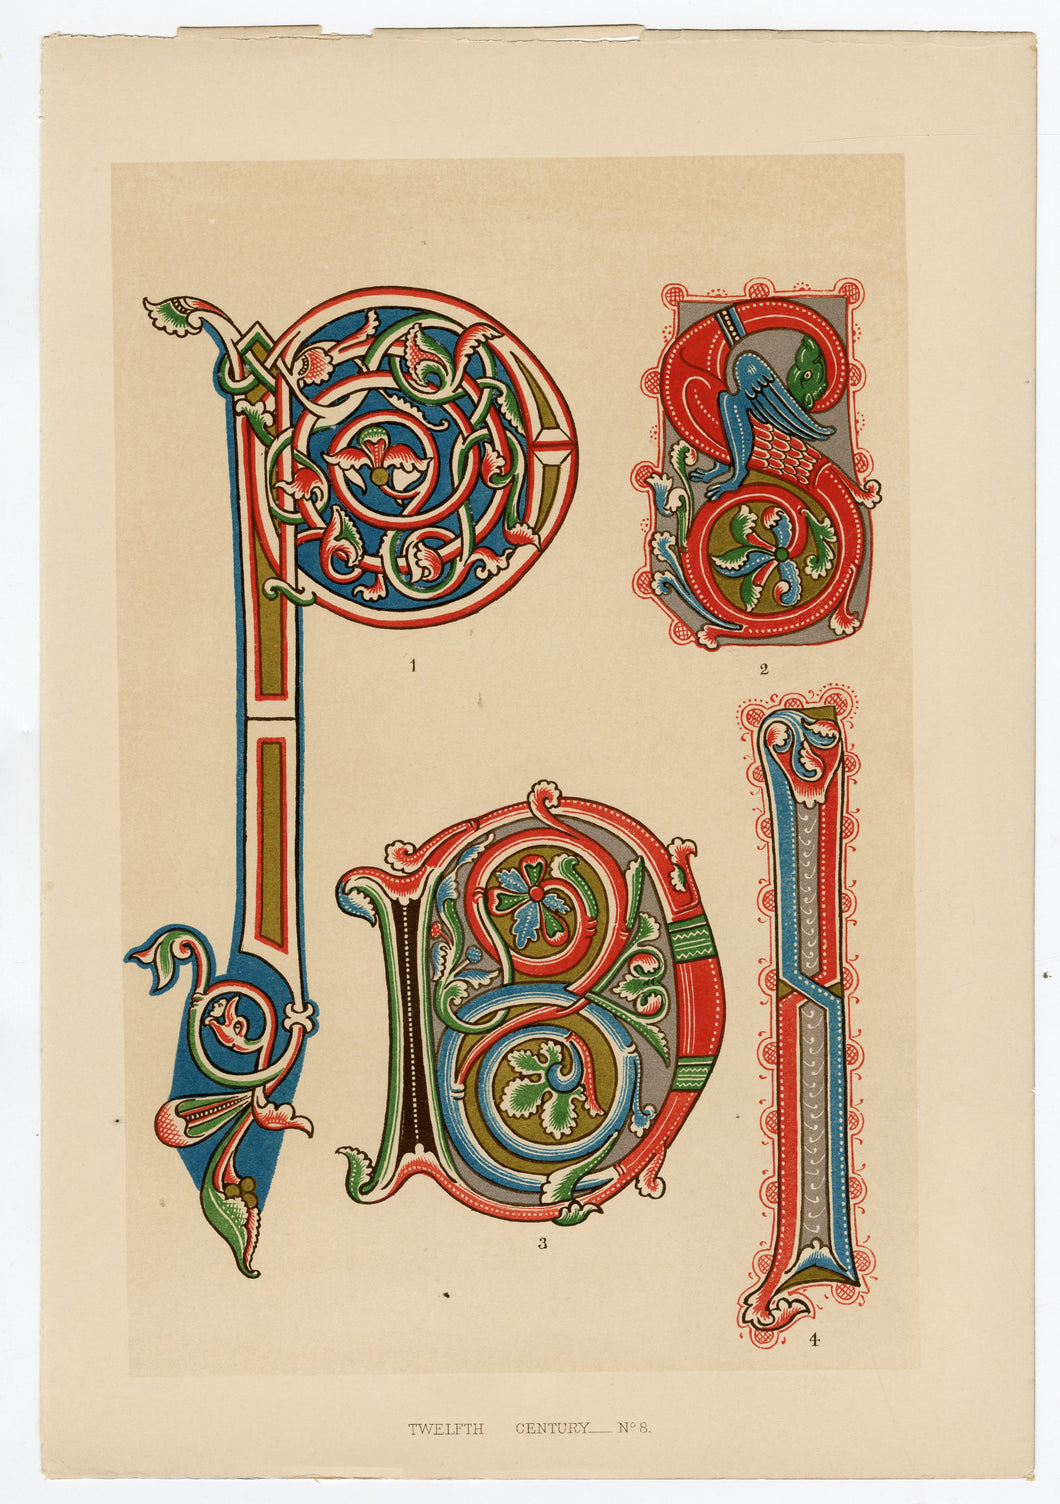 Beautiful Chromolithograph Book Plate Illuminated Letters About 125 Years Old Plate Number 6